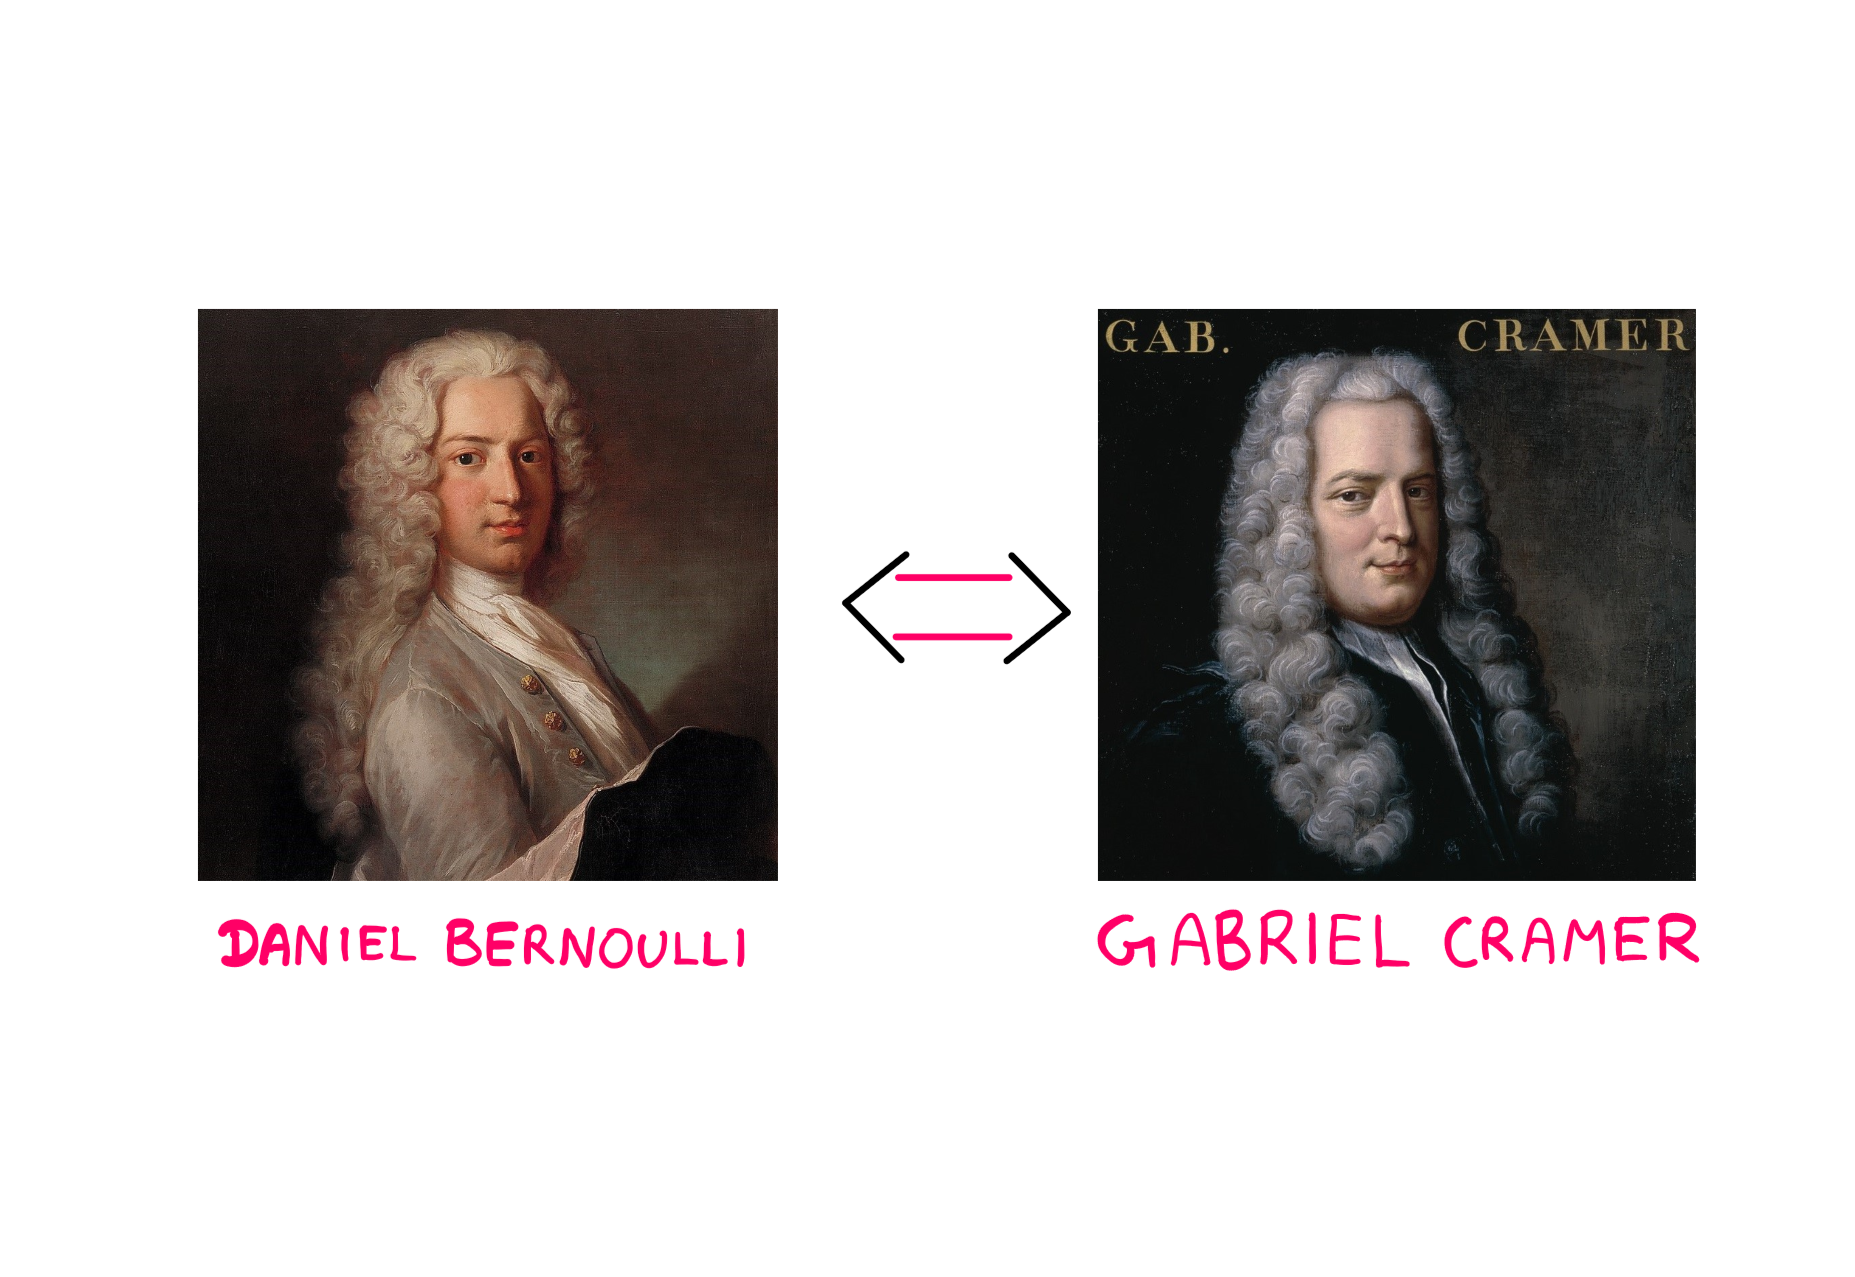 St. Petersburg Paradox - How To Actually Price Uncertainty? - A portrait of Daniel Bernoulli on the left (image from WikiCC), and a portrait of Gabriel Cramer on the right (image from WikiCC) - image further edited by the author